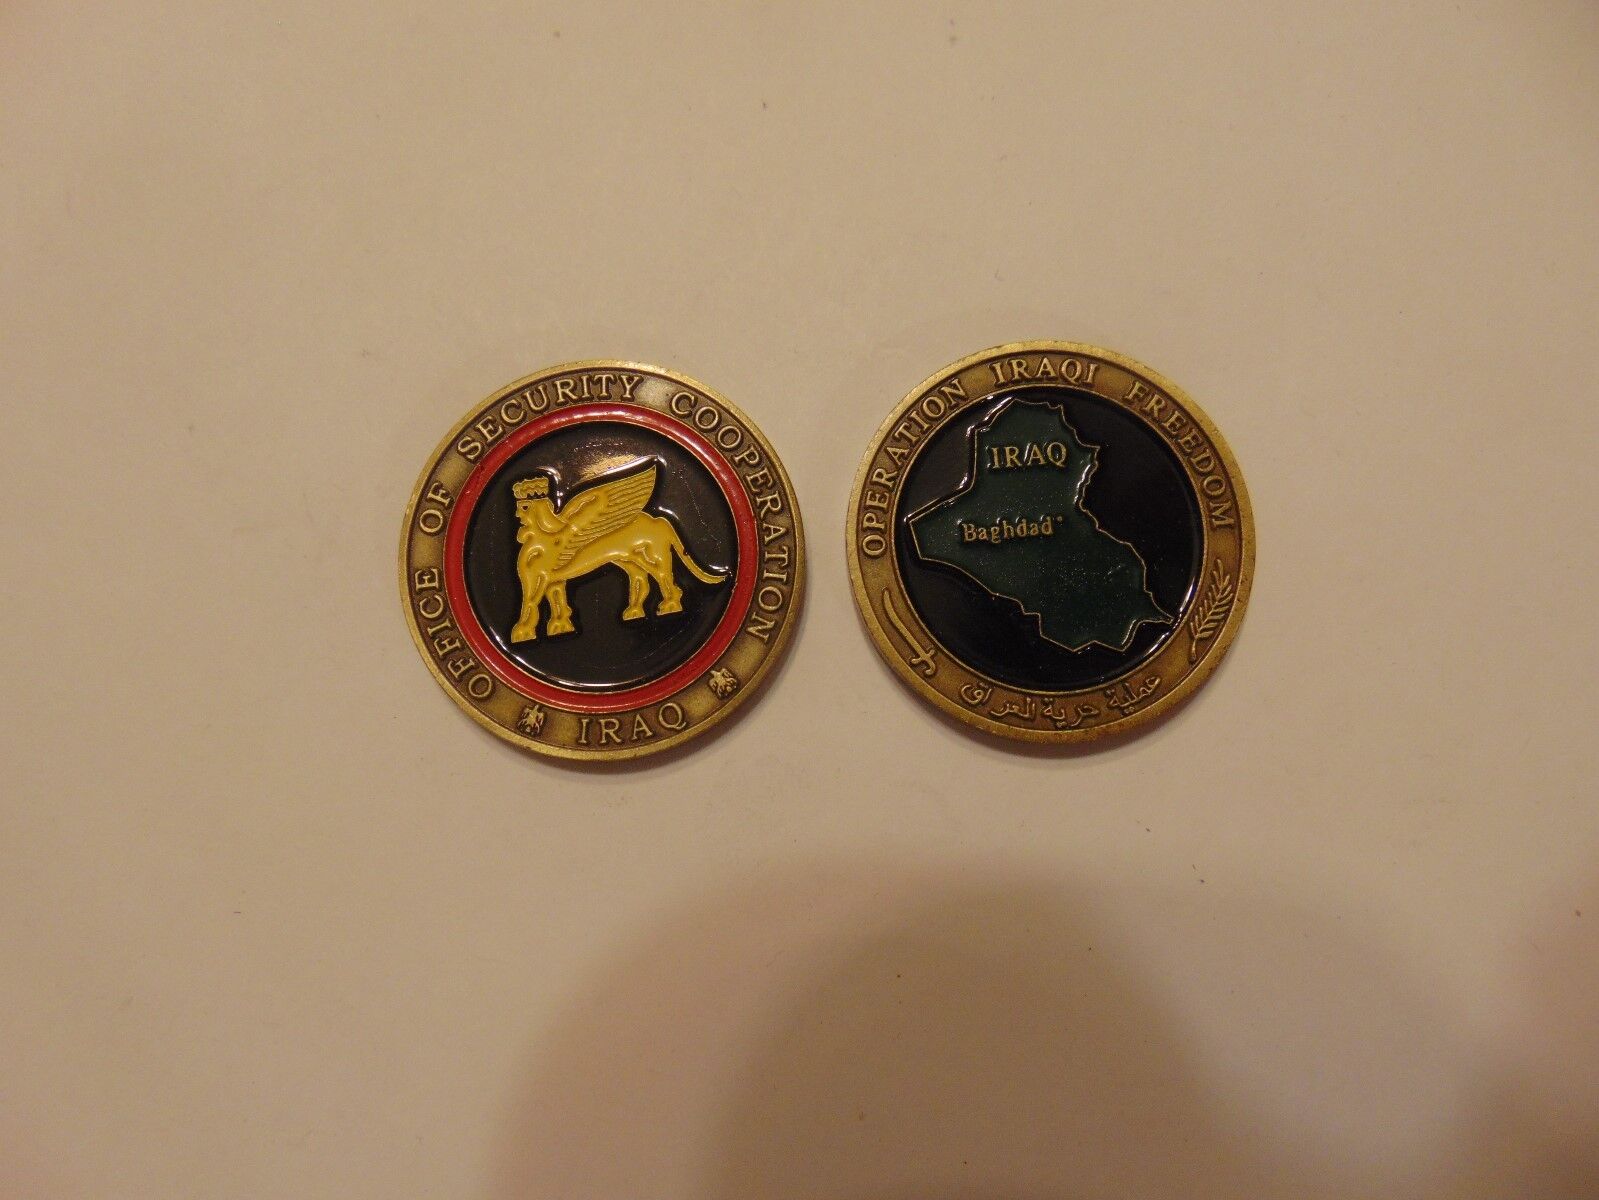 CHALLENGE COIN OFFICE OF SECURITY COOPERATION IRAQ OPERATION IRAQI FREEDOM BAGHD